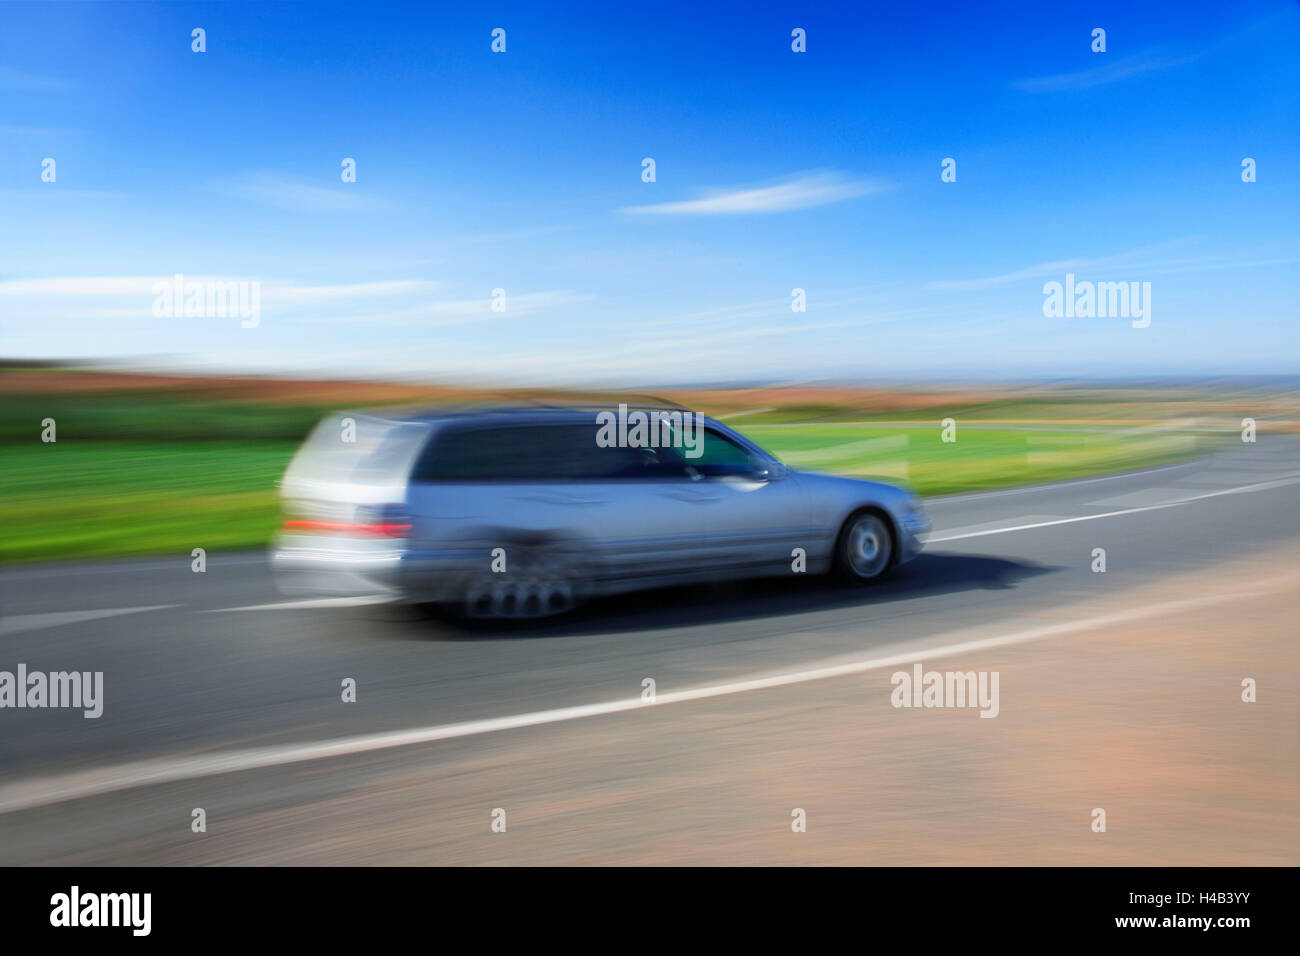 Silver estate car driving on country road under blue sky, motion blur Stock Photo